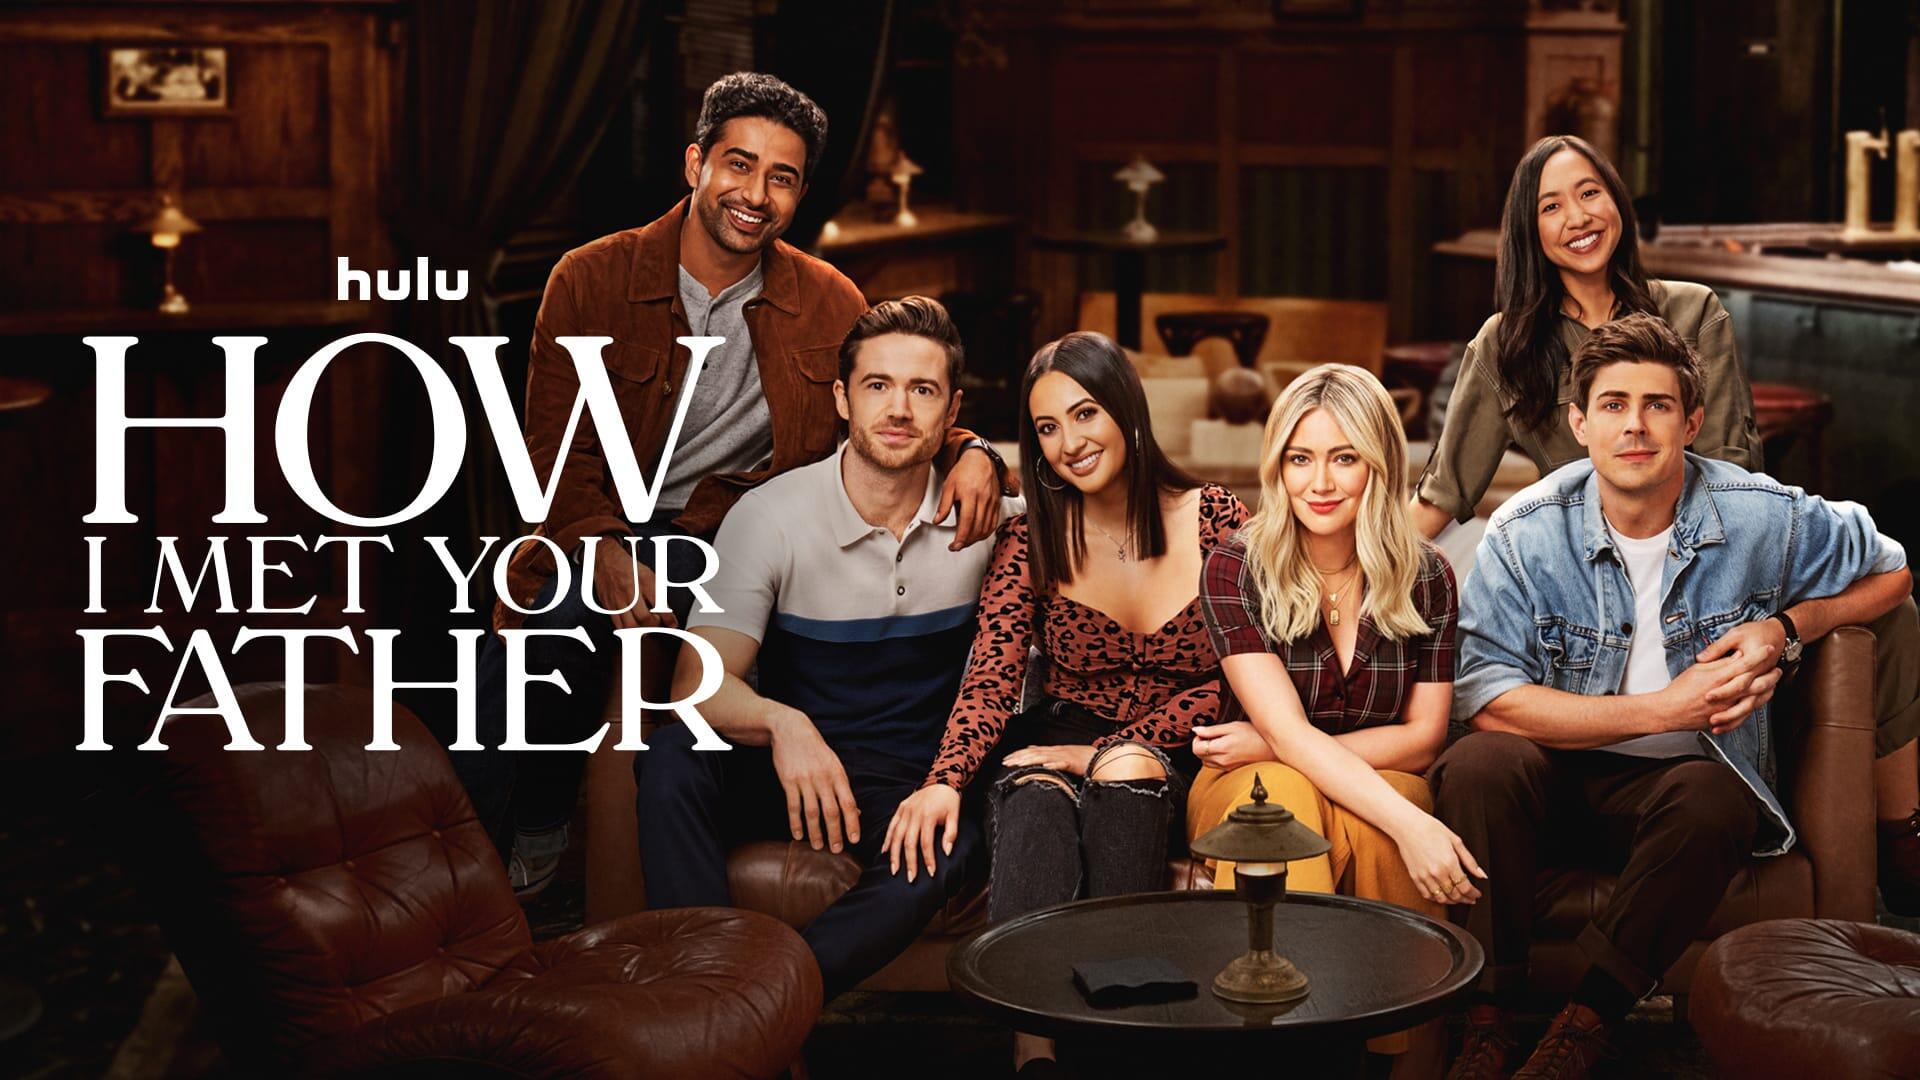 How I Met Your Father -- In the near future, Sophie (Hilary Duff) is telling her son the story of how she met his father: a story that catapults us back to the year 2021 where Sophie and her close-knit group of friends are in the midst of figuring out who they are, what they want out of life, and how to fall in love in the age of dating apps and limitless options. Sophie (Hilary Duff), Jesse (Chris Lowell), Valentina (Francia Raisa), Charlie (Tom Ainsley), Ellen (Tien Tran) and Sid (Suraj Sharma), shown. (Courtesy of Hulu)